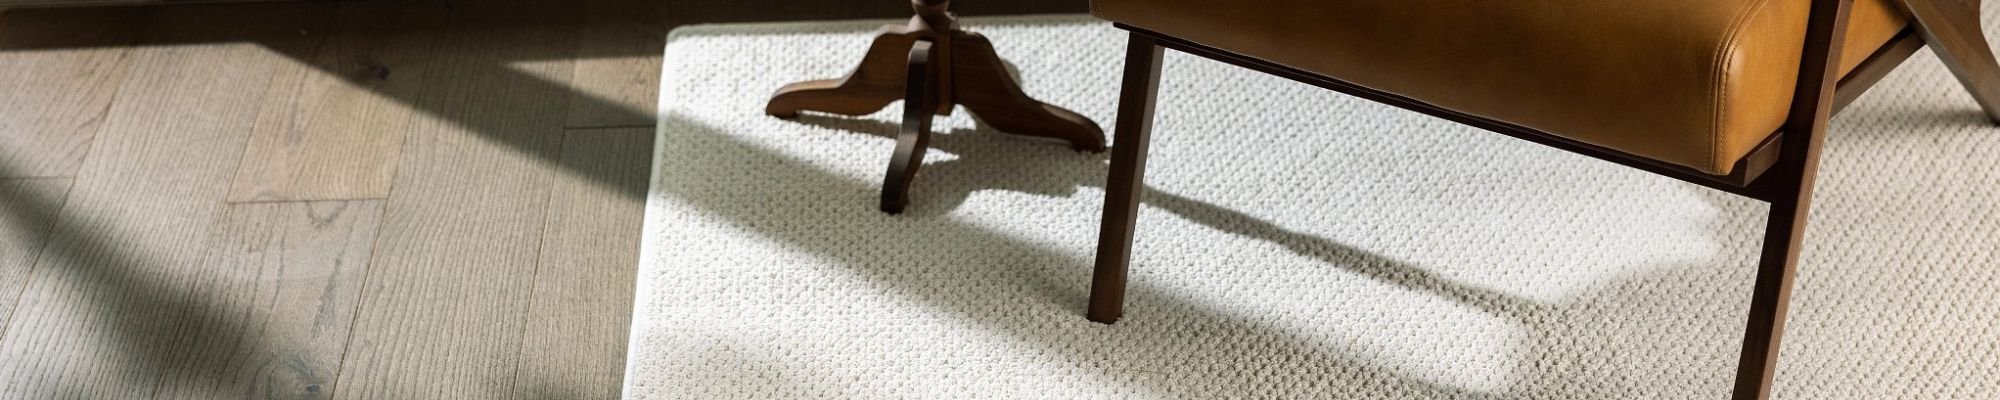 Chair and table on rug - Taylorville Home Source in Taylorville